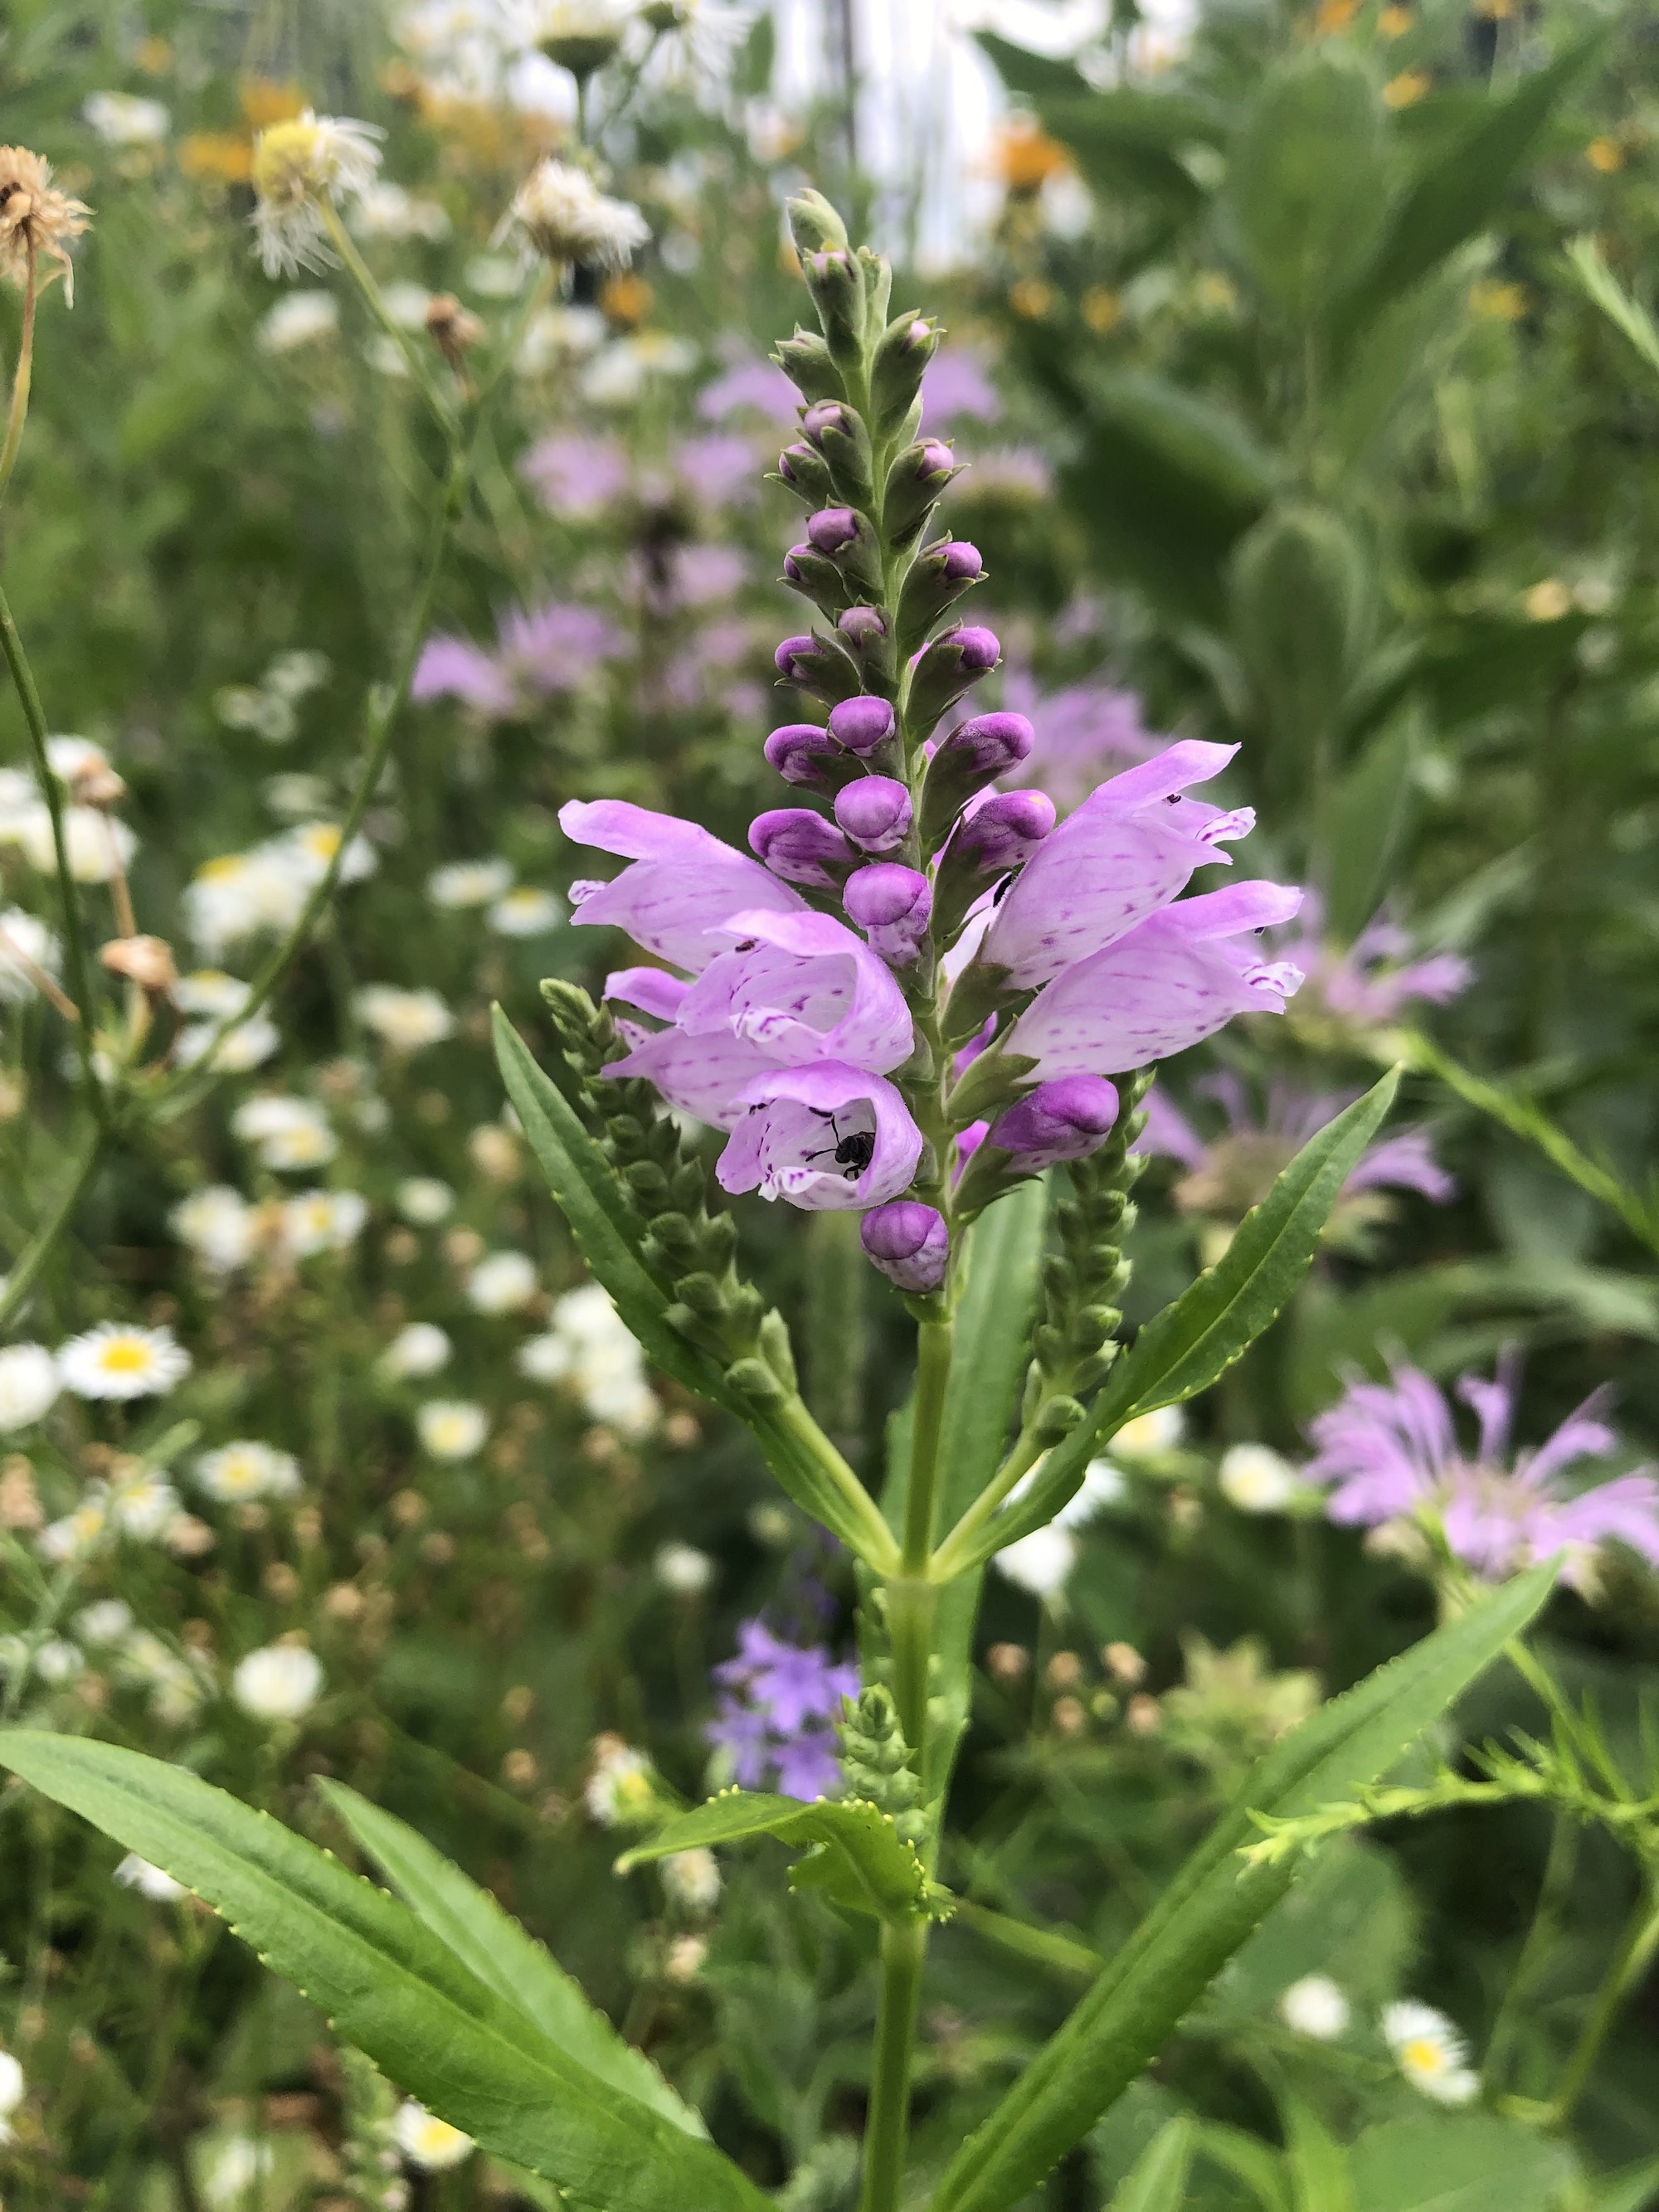 Obedient Plant along Gregory Street Bike Path in Madison, Wisconsin on July 31, 2021.